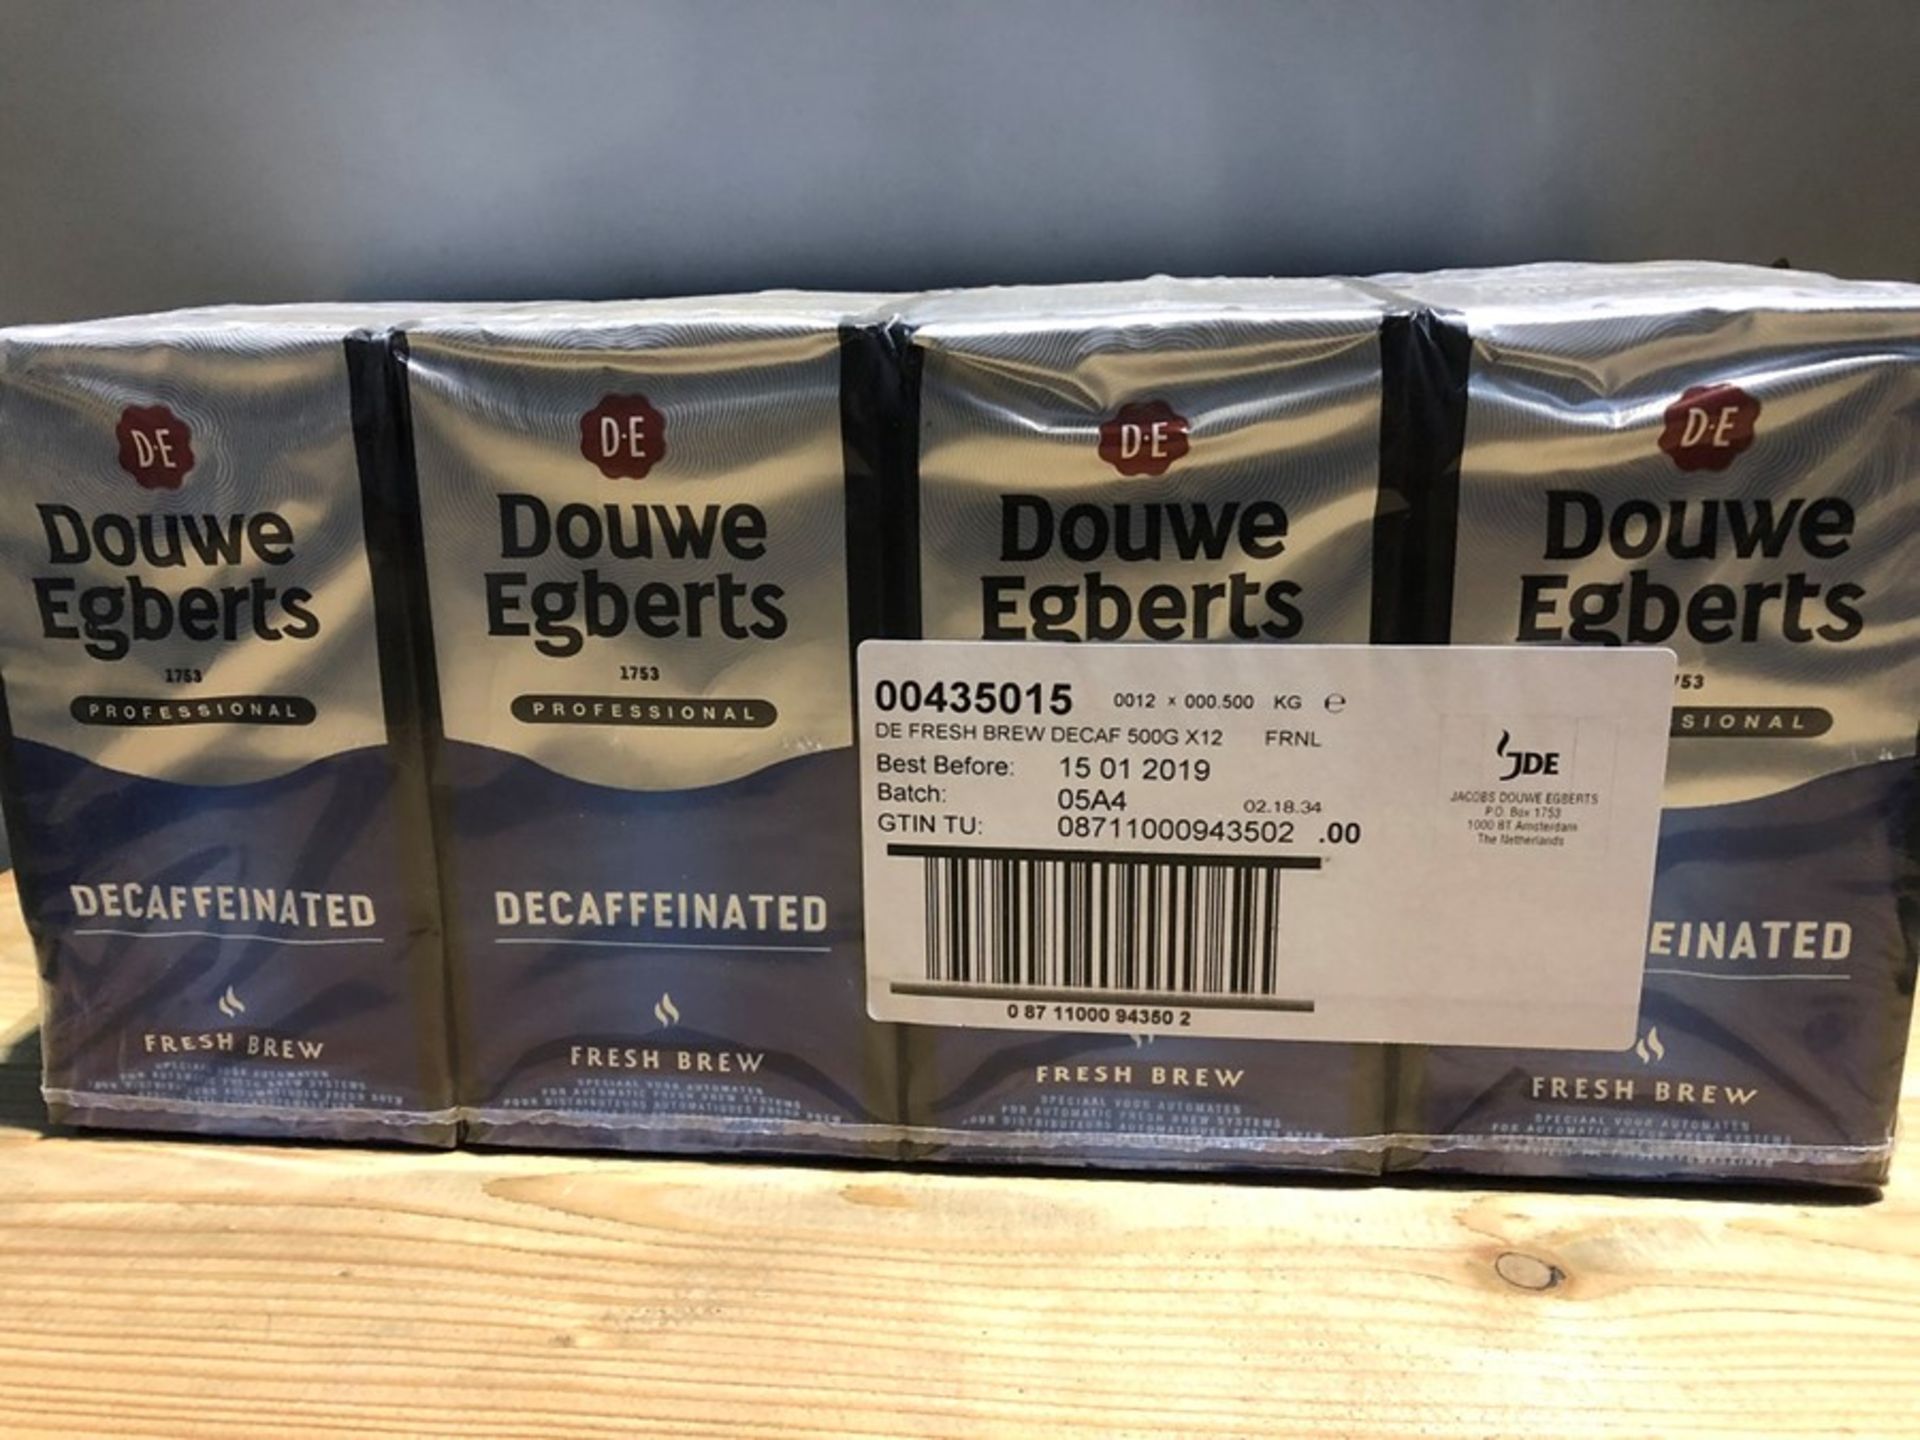 1 PACK OF 12 DOUWE EGBERTS DECAFFINATED COFFEE / BEST BEFORE: 15/01/2019 (PUBLIC VIEWING AVAILABLE)